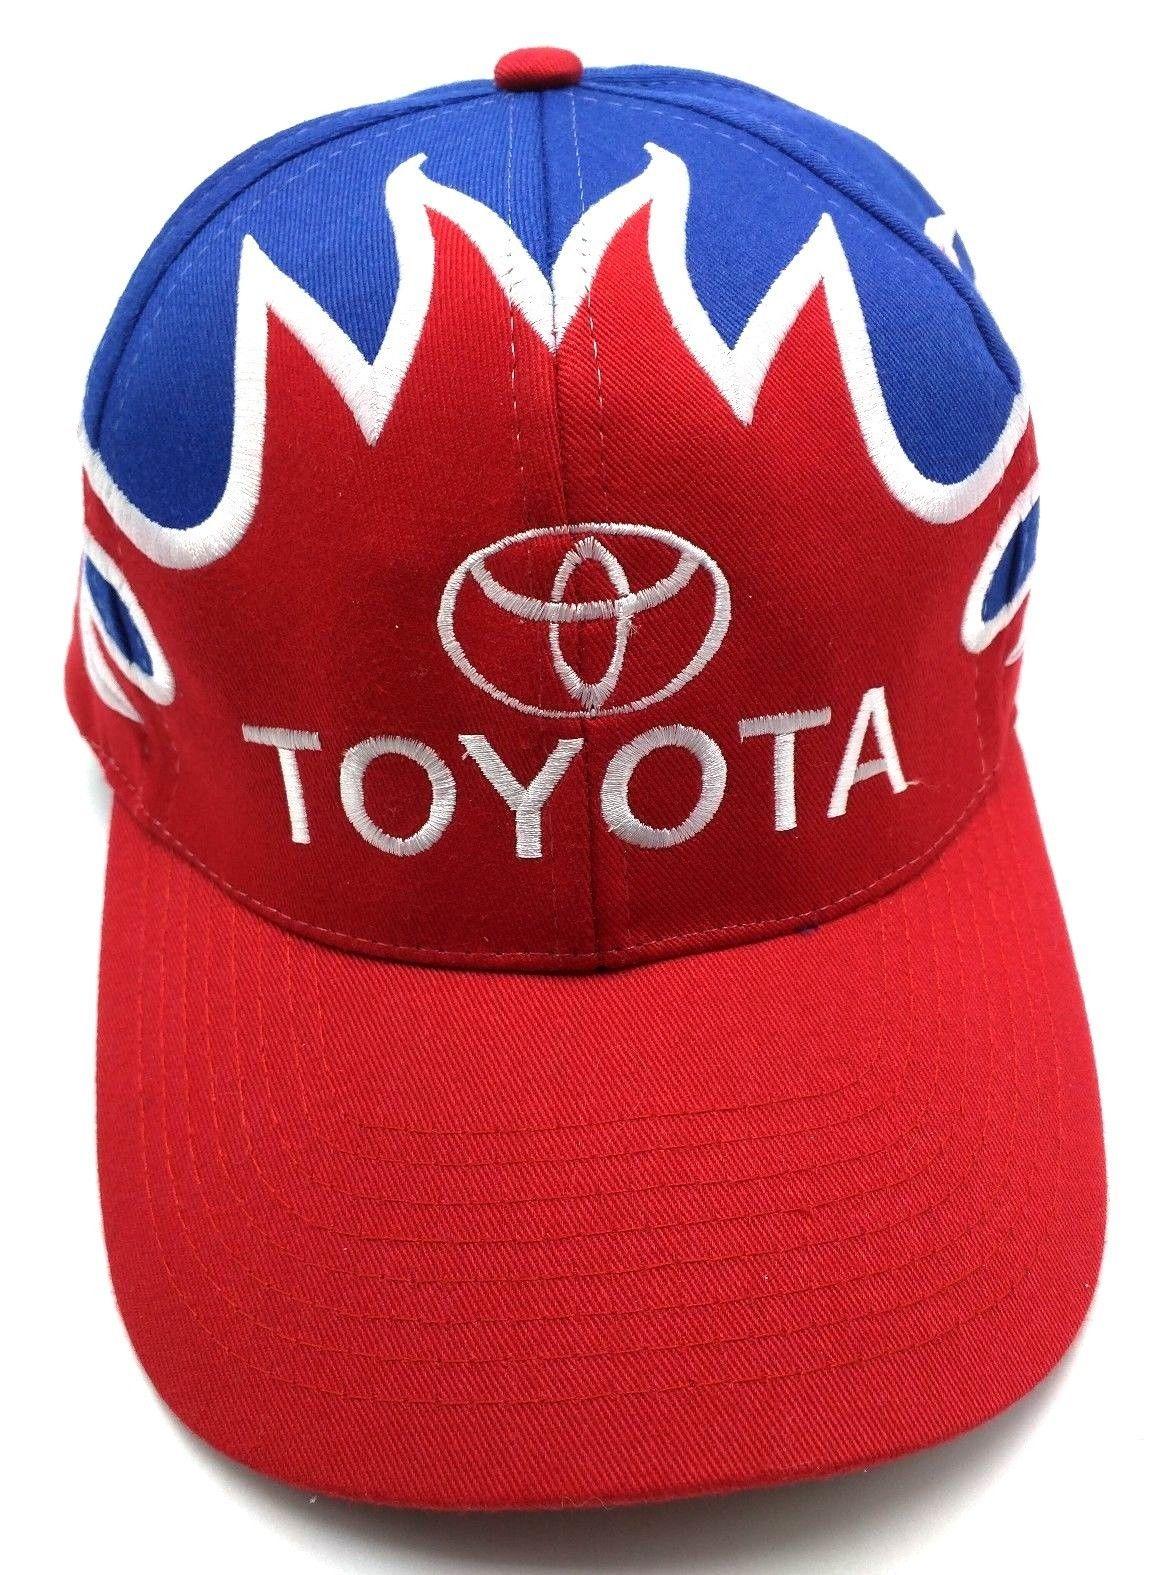 Red and White Flame Logo - TOYOTA flame / pattern red / white / flame blue adjustable cap / hat ...